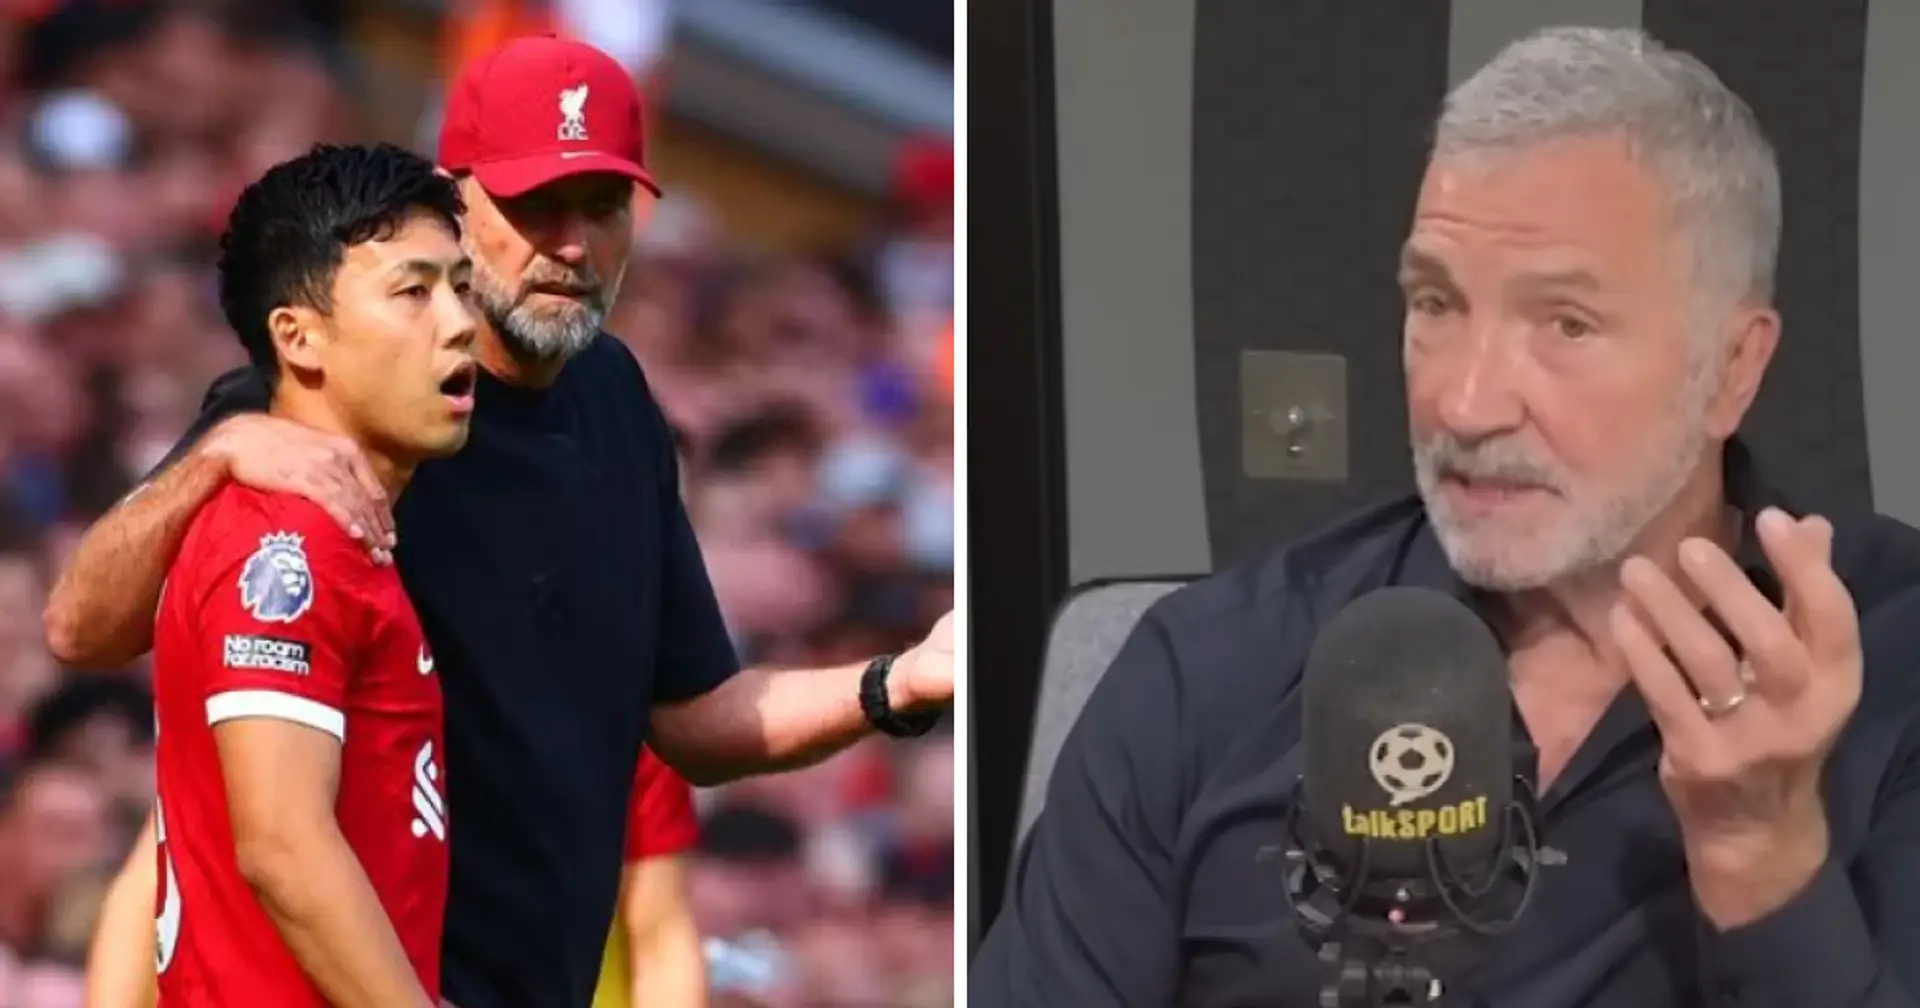 'He's not going to come in and make the difference': Graeme Souness claims Endo won't make impact right away